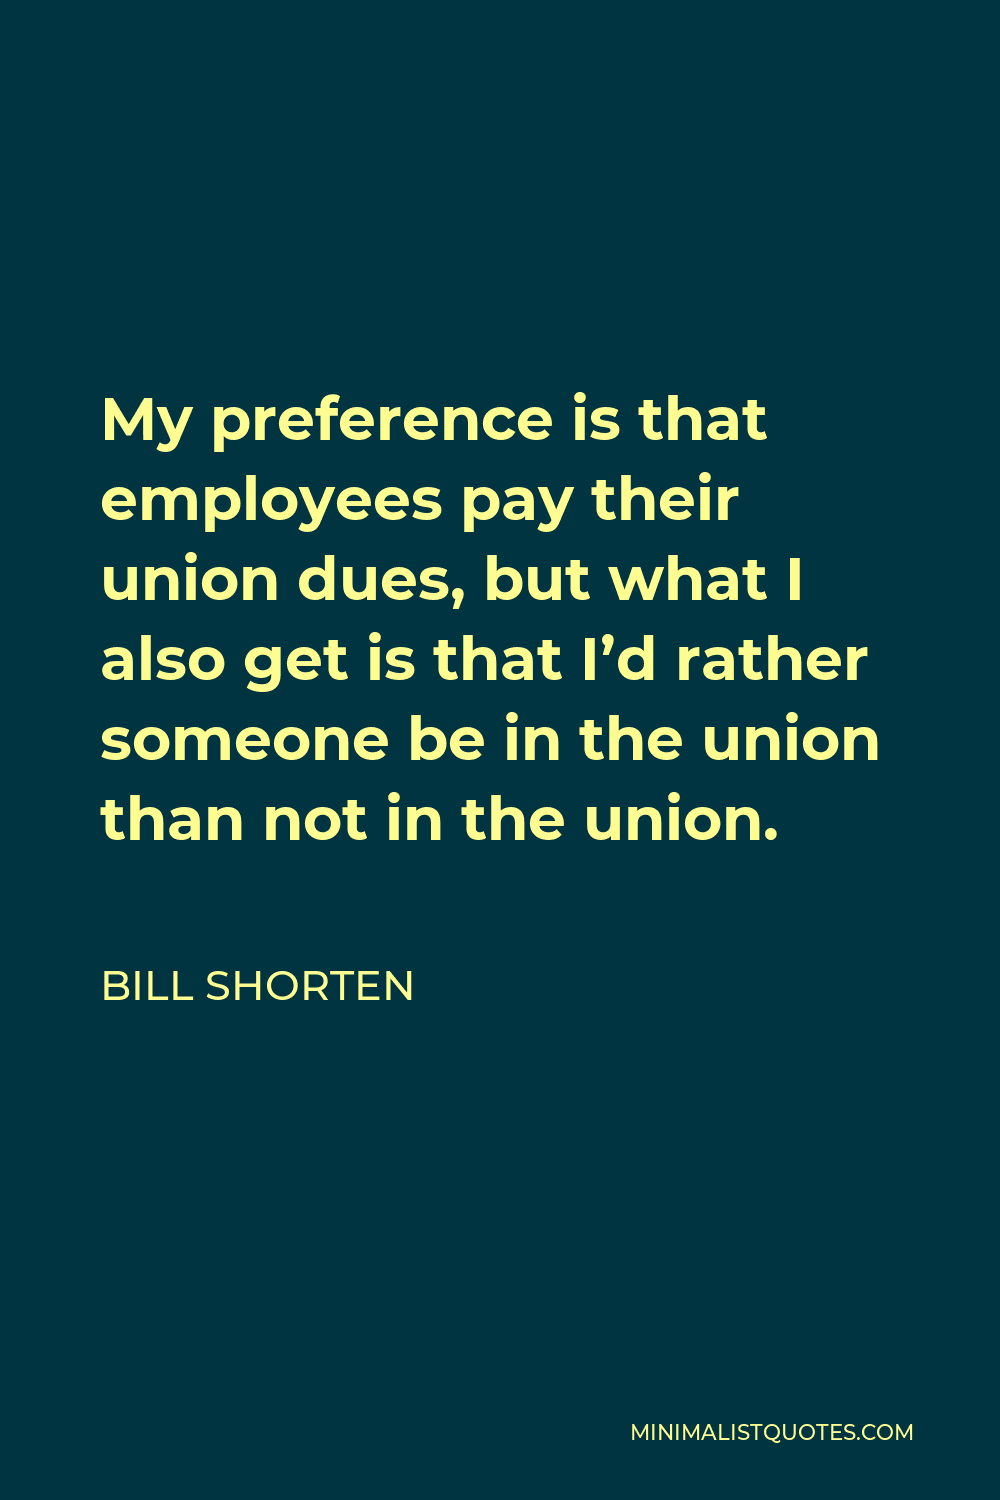 Bill Shorten Quote - My preference is that employees pay their union dues, but what I also get is that I’d rather someone be in the union than not in the union.